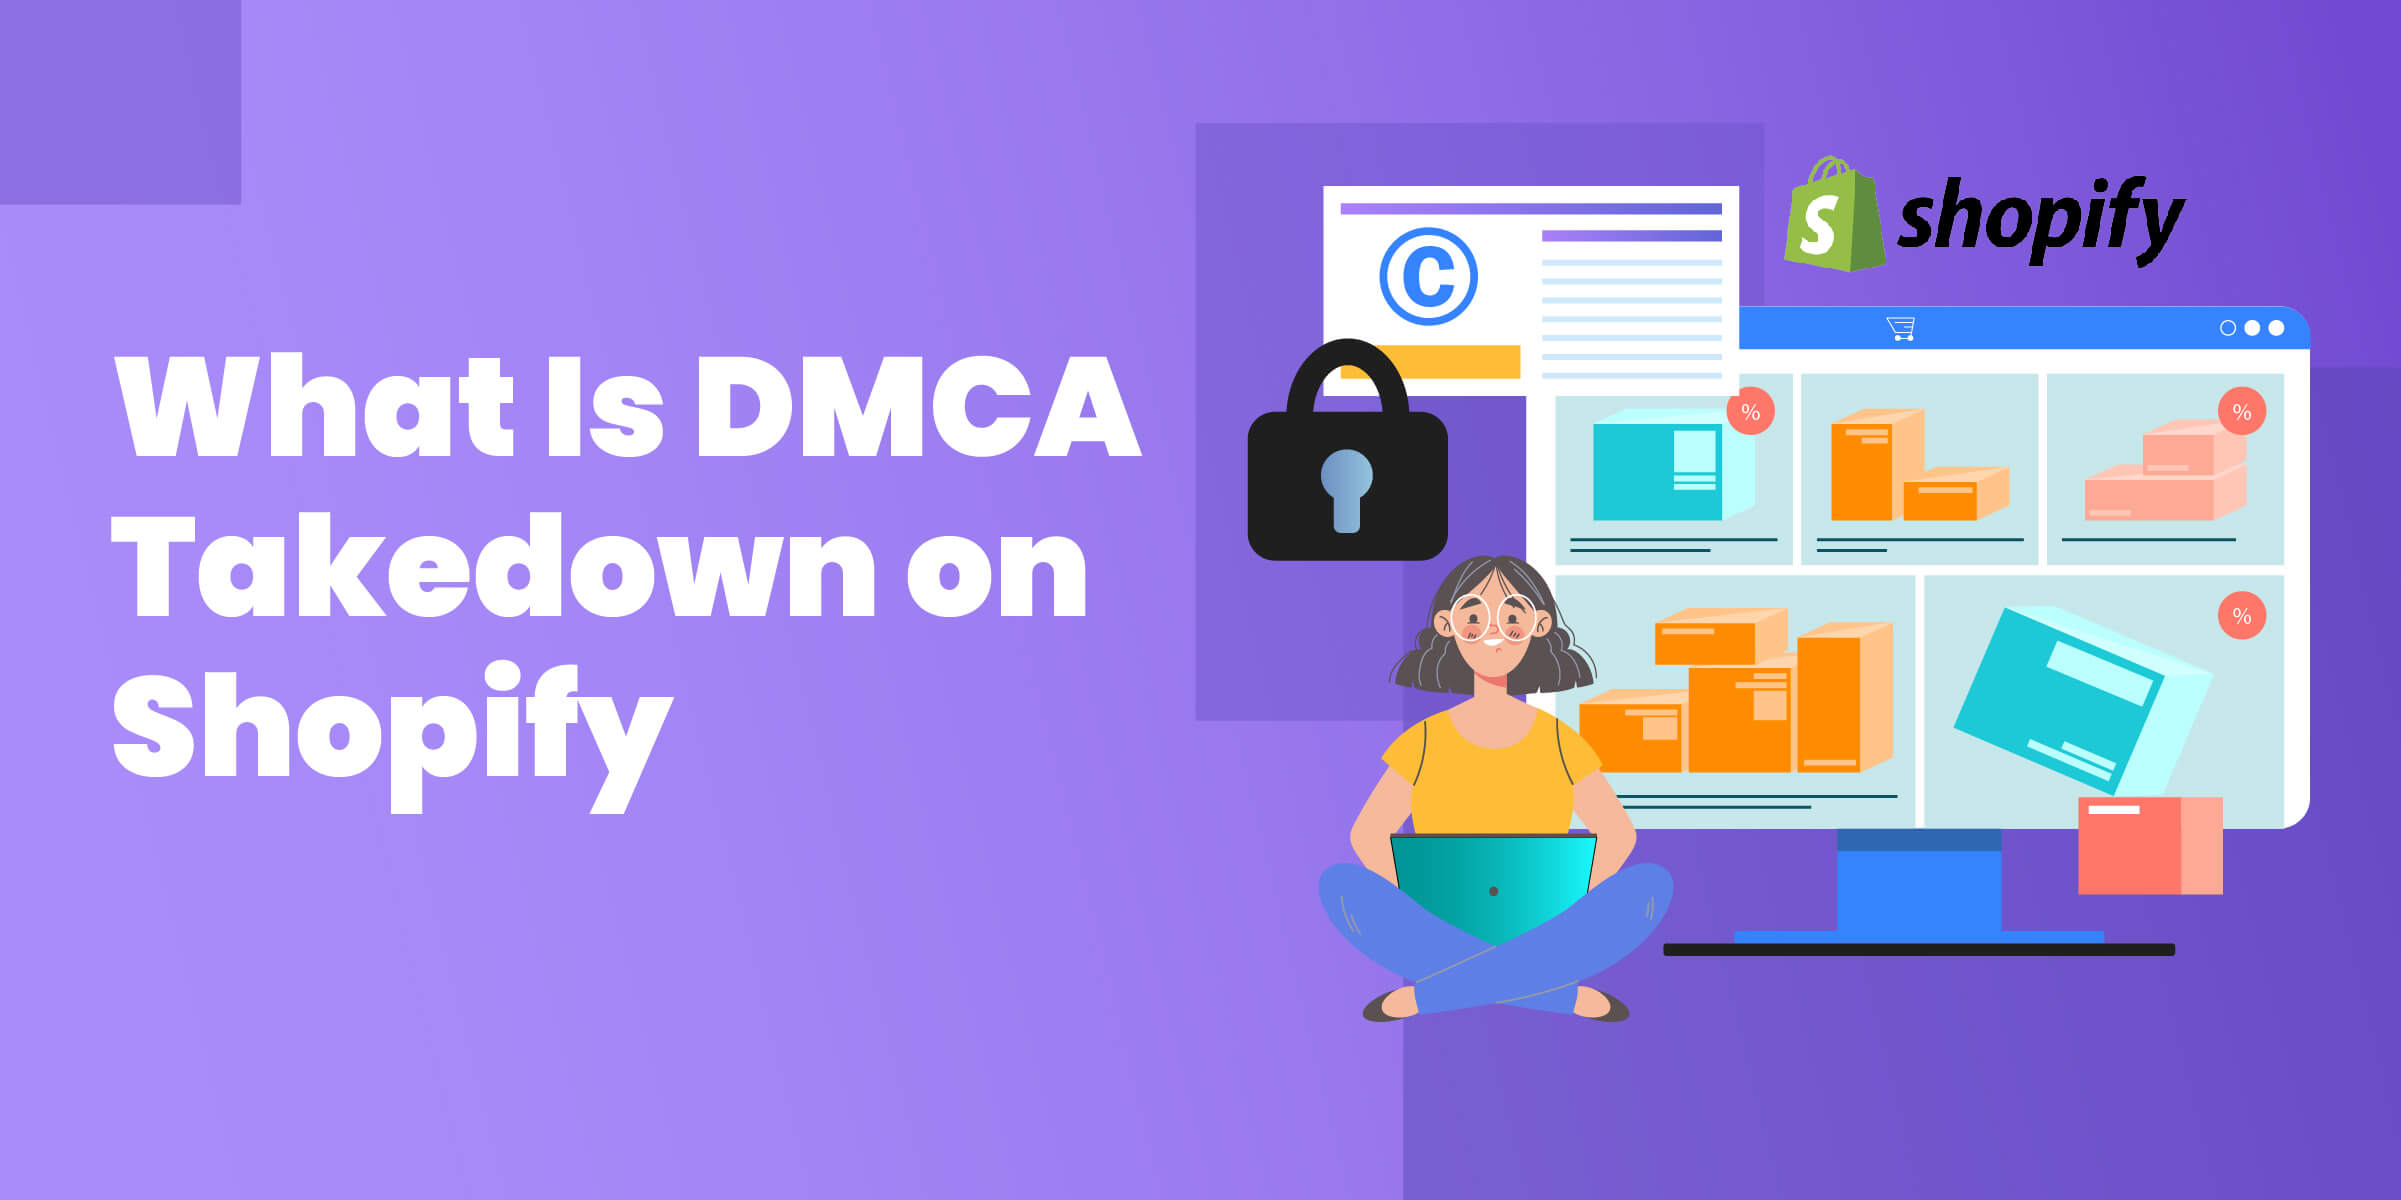 What is DMCA on Shopify